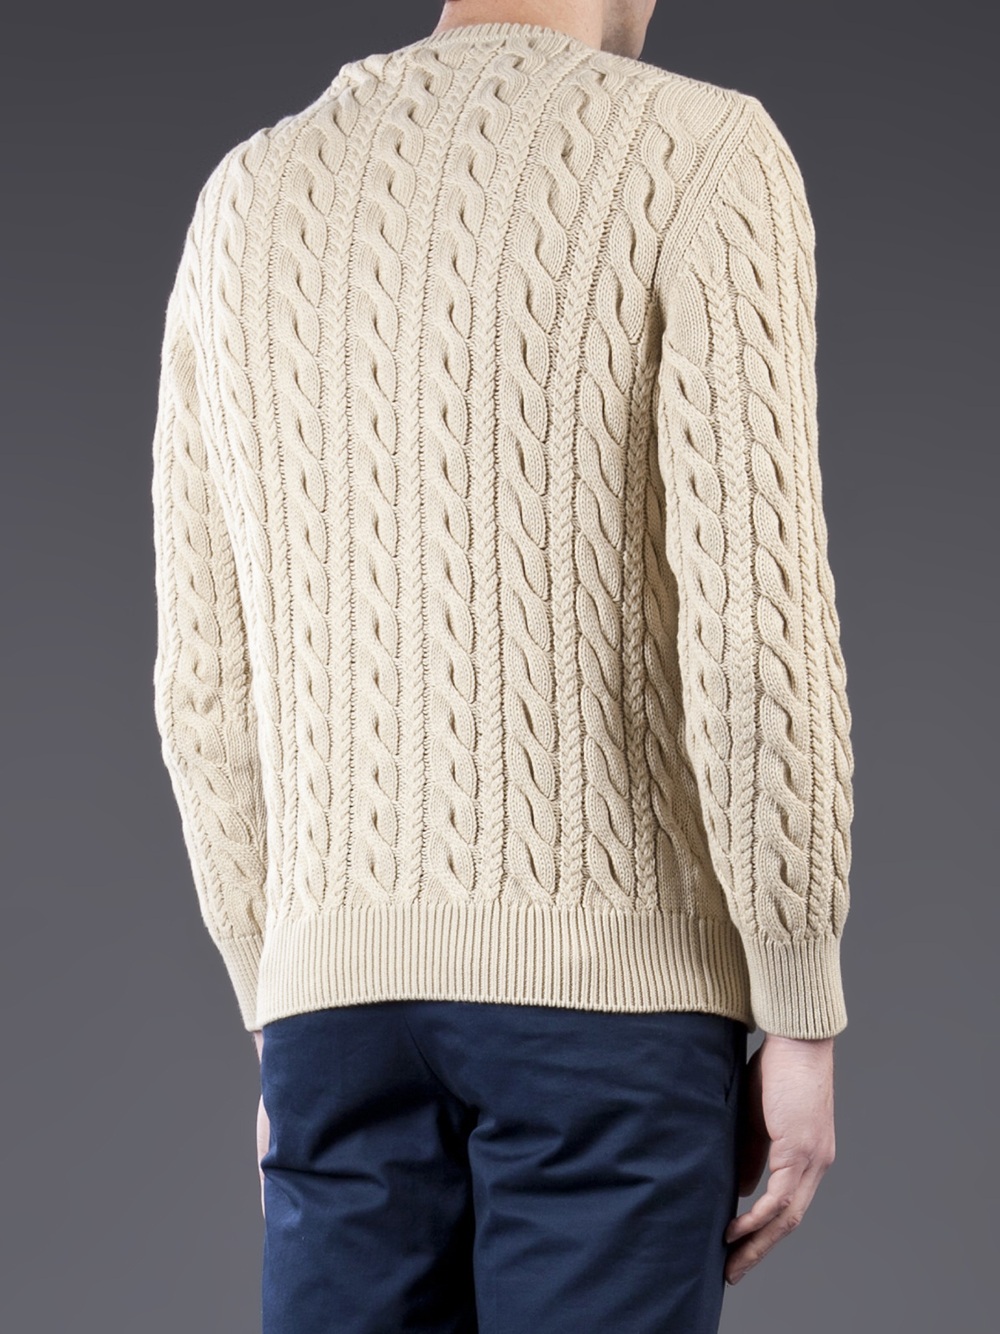 Maison Kitsuné Cable Knit Sweater in Natural for Men - Lyst